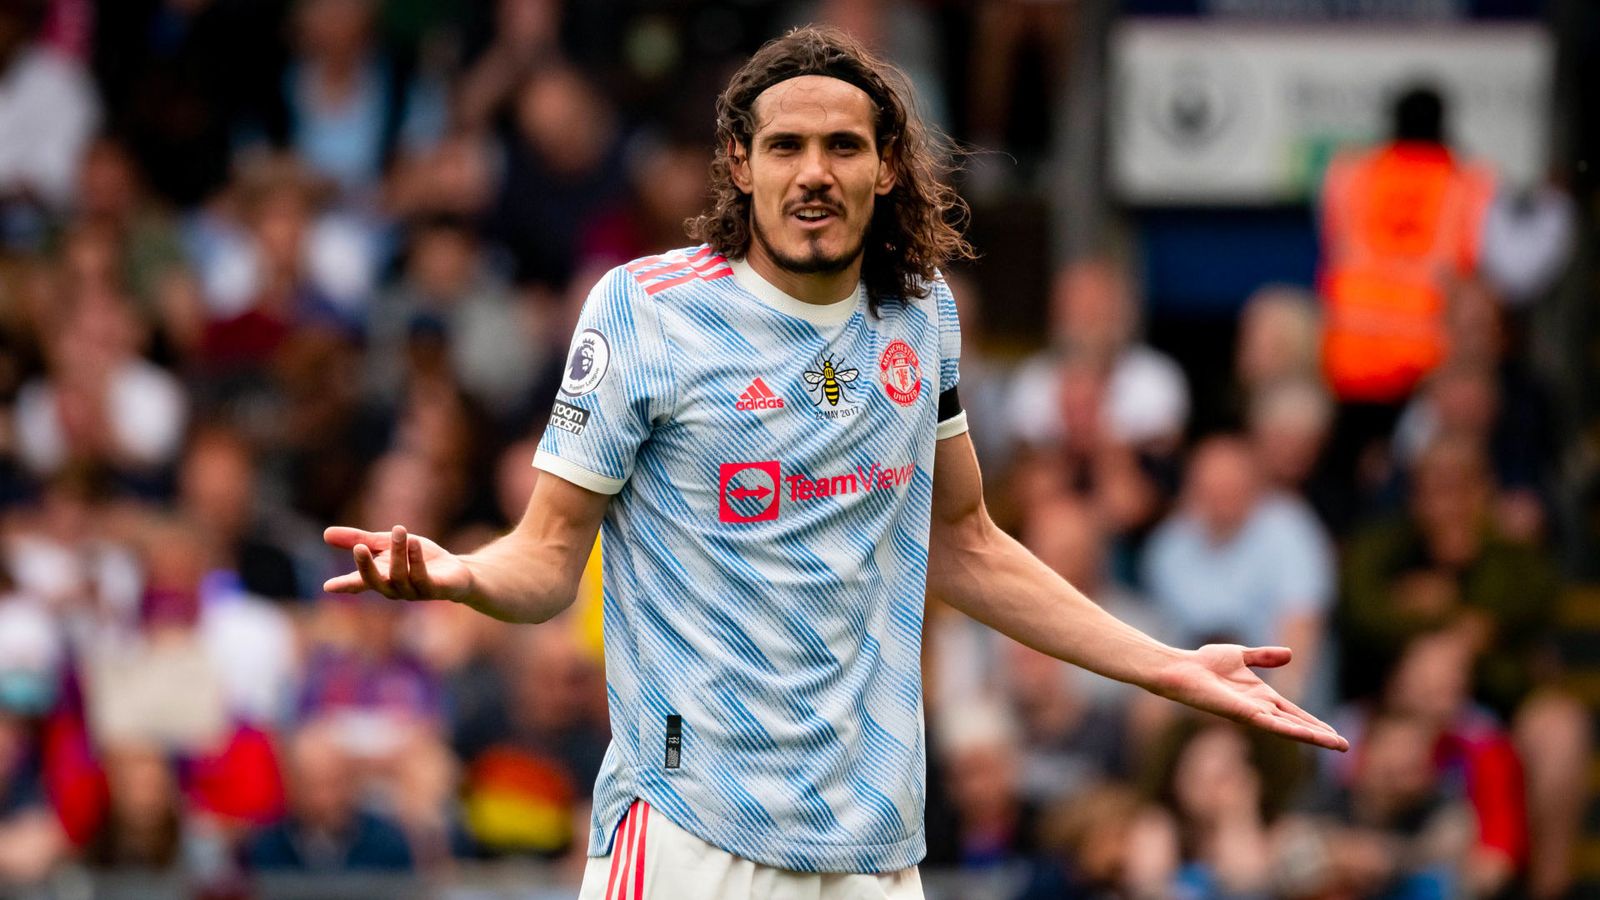 Manchester United adidas 2021/22 kit image of the Cavani wearing a white and blue patterned kit with bright red details.